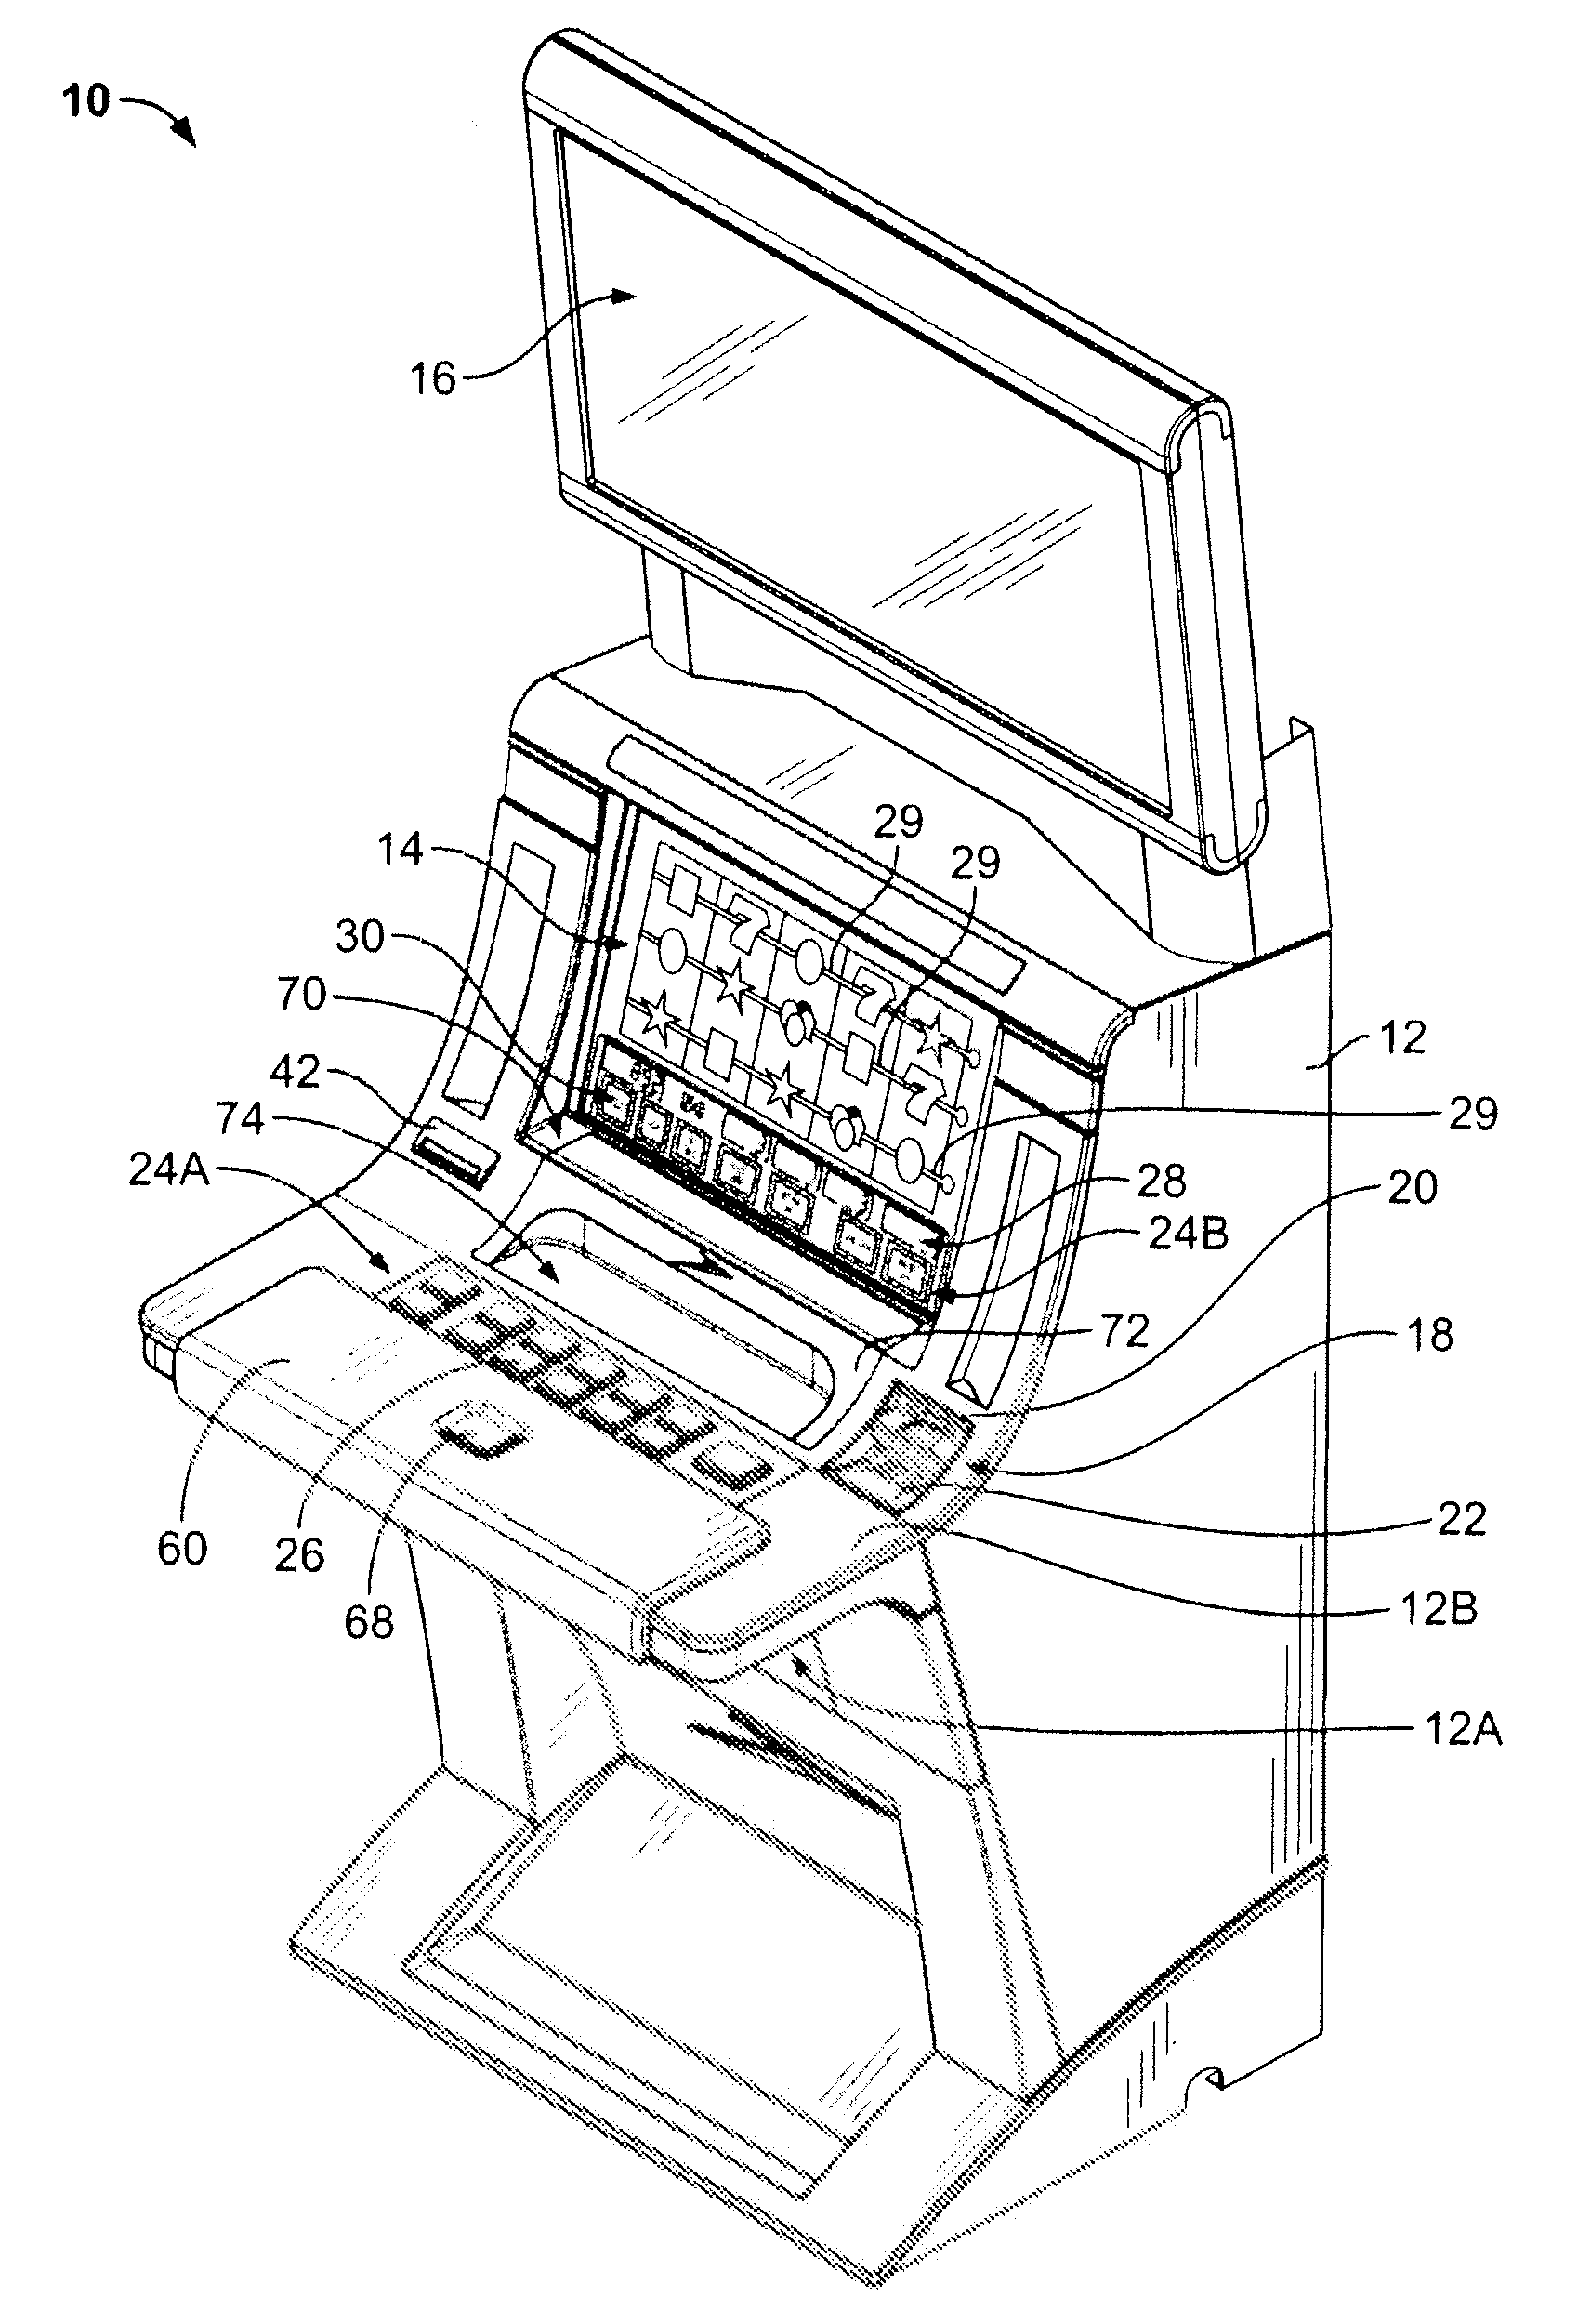 Insert having storage space for a convertible area of an electronic gaming machine